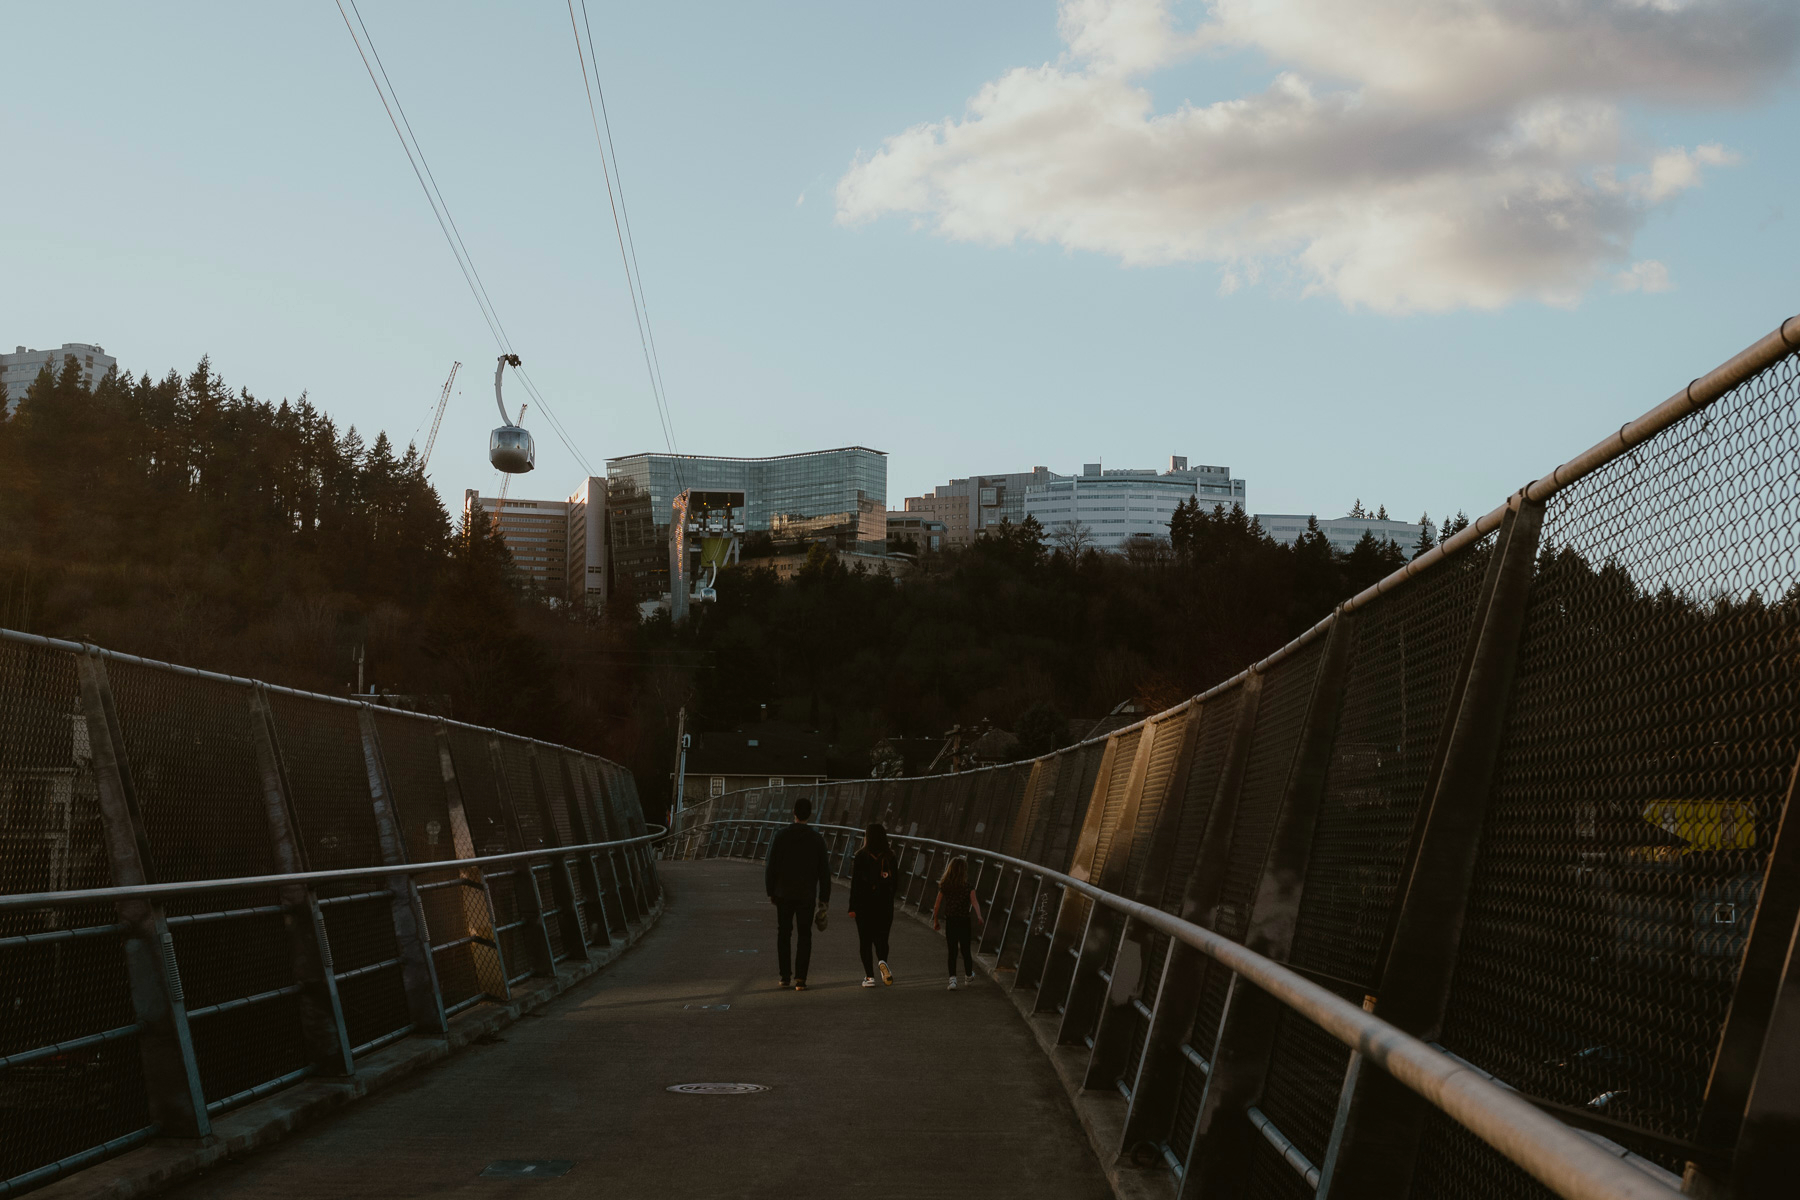 A walkway with a mesh fence on either side leading towards a cityscape, with a cable car system overhead and people walking along the path.